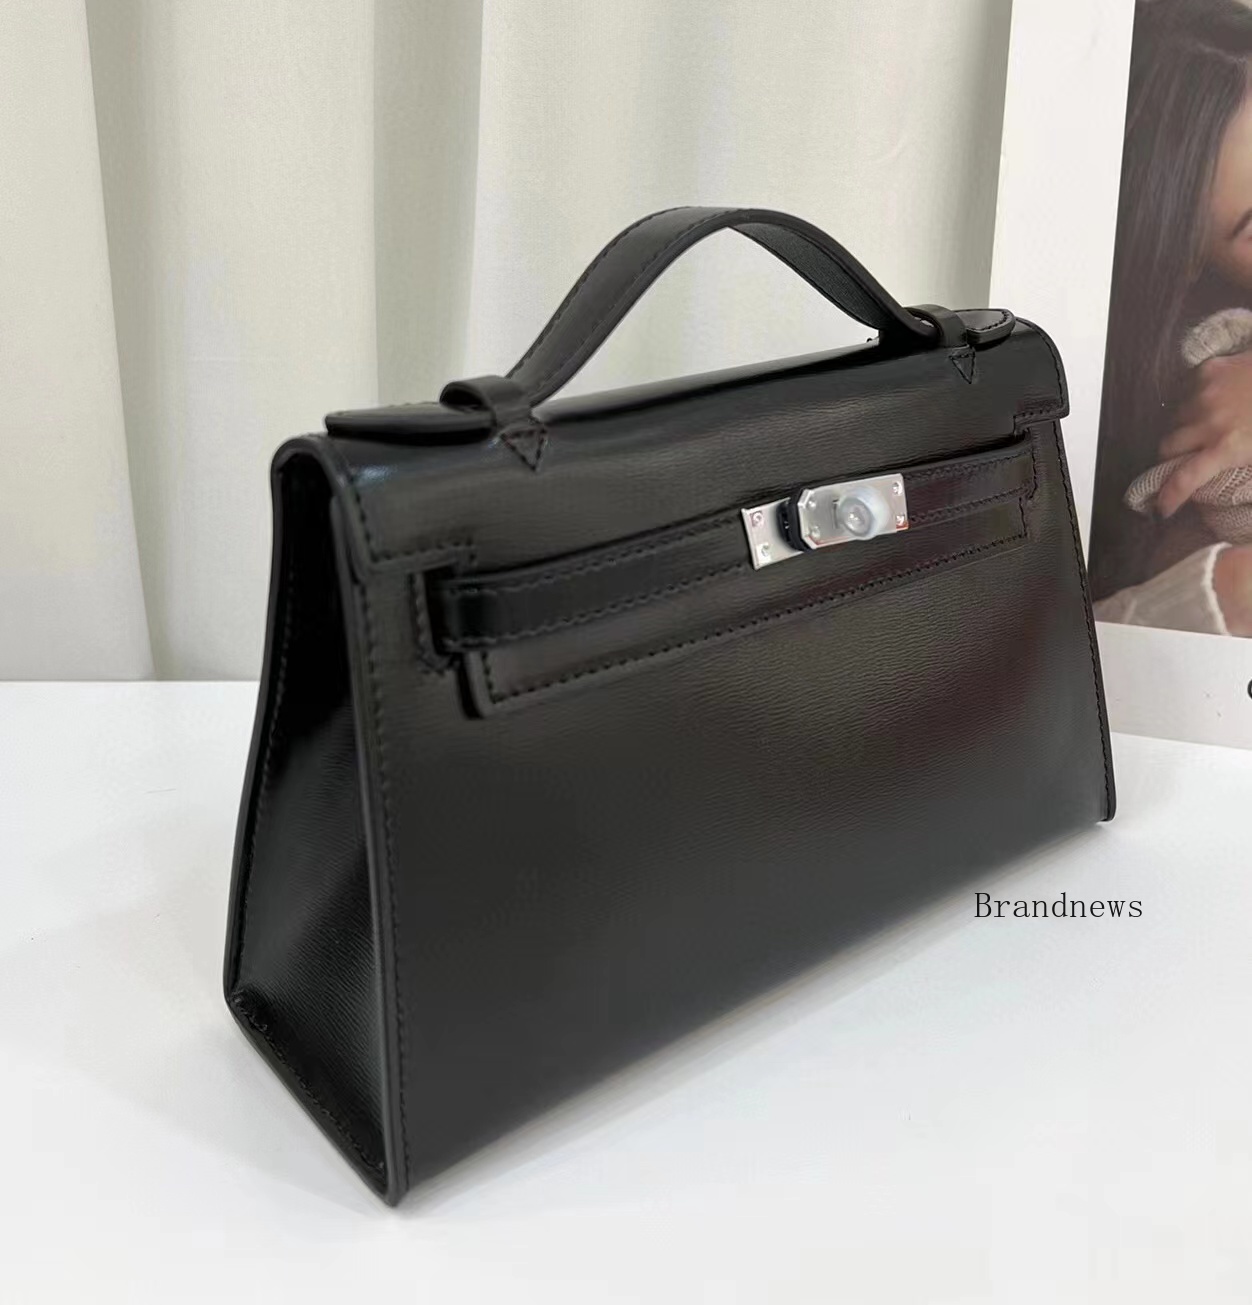 Classic Ladies Shoulder Bag Box Leather Real Cowhide Leather Purses And Handbags Paris Designer Evening Bags Fashion Day Clutches Small Totes 21cm 2457